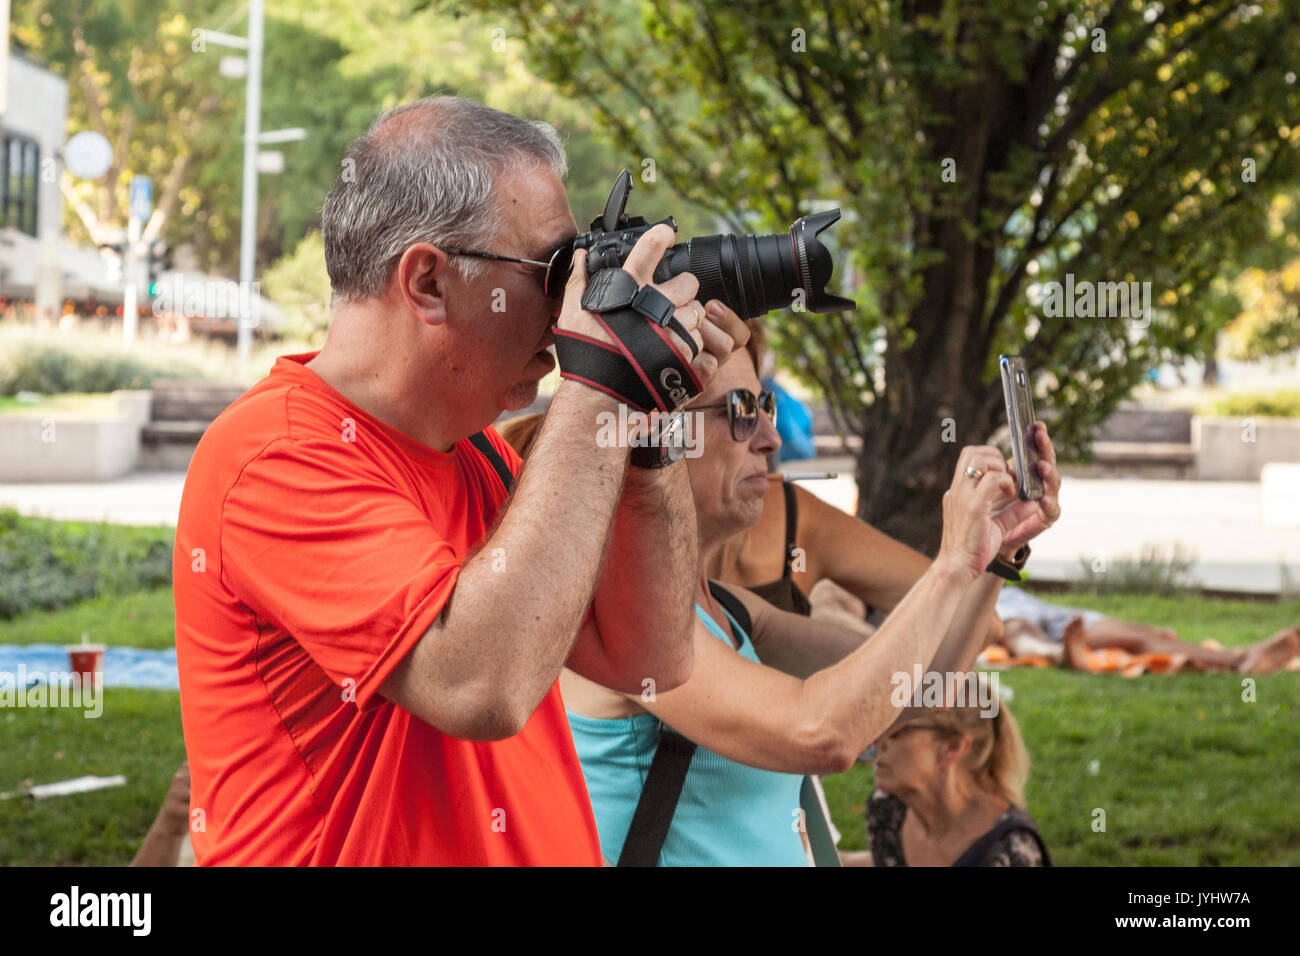 BUDAPEST, HUNGARY - AUGUST 11, 2017: Two people taking pictures in a Budapest park, one using a semi professional DSLR camera, the other using an amat Stock Photo